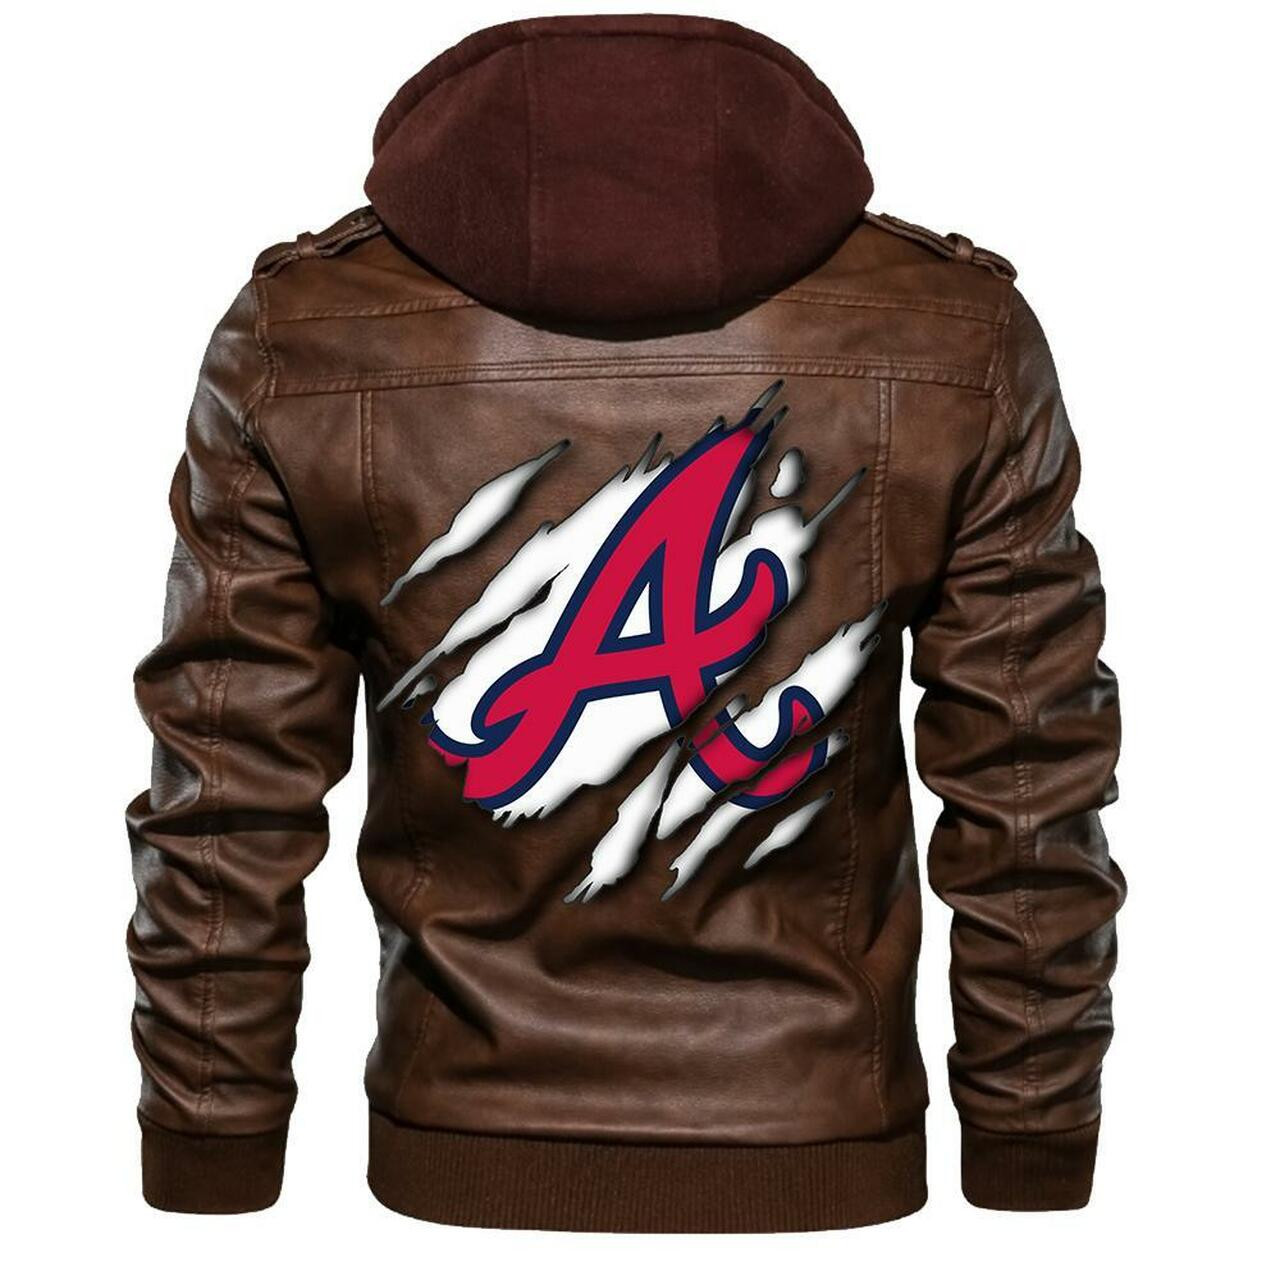 Are you looking for a great leather jacket? 223